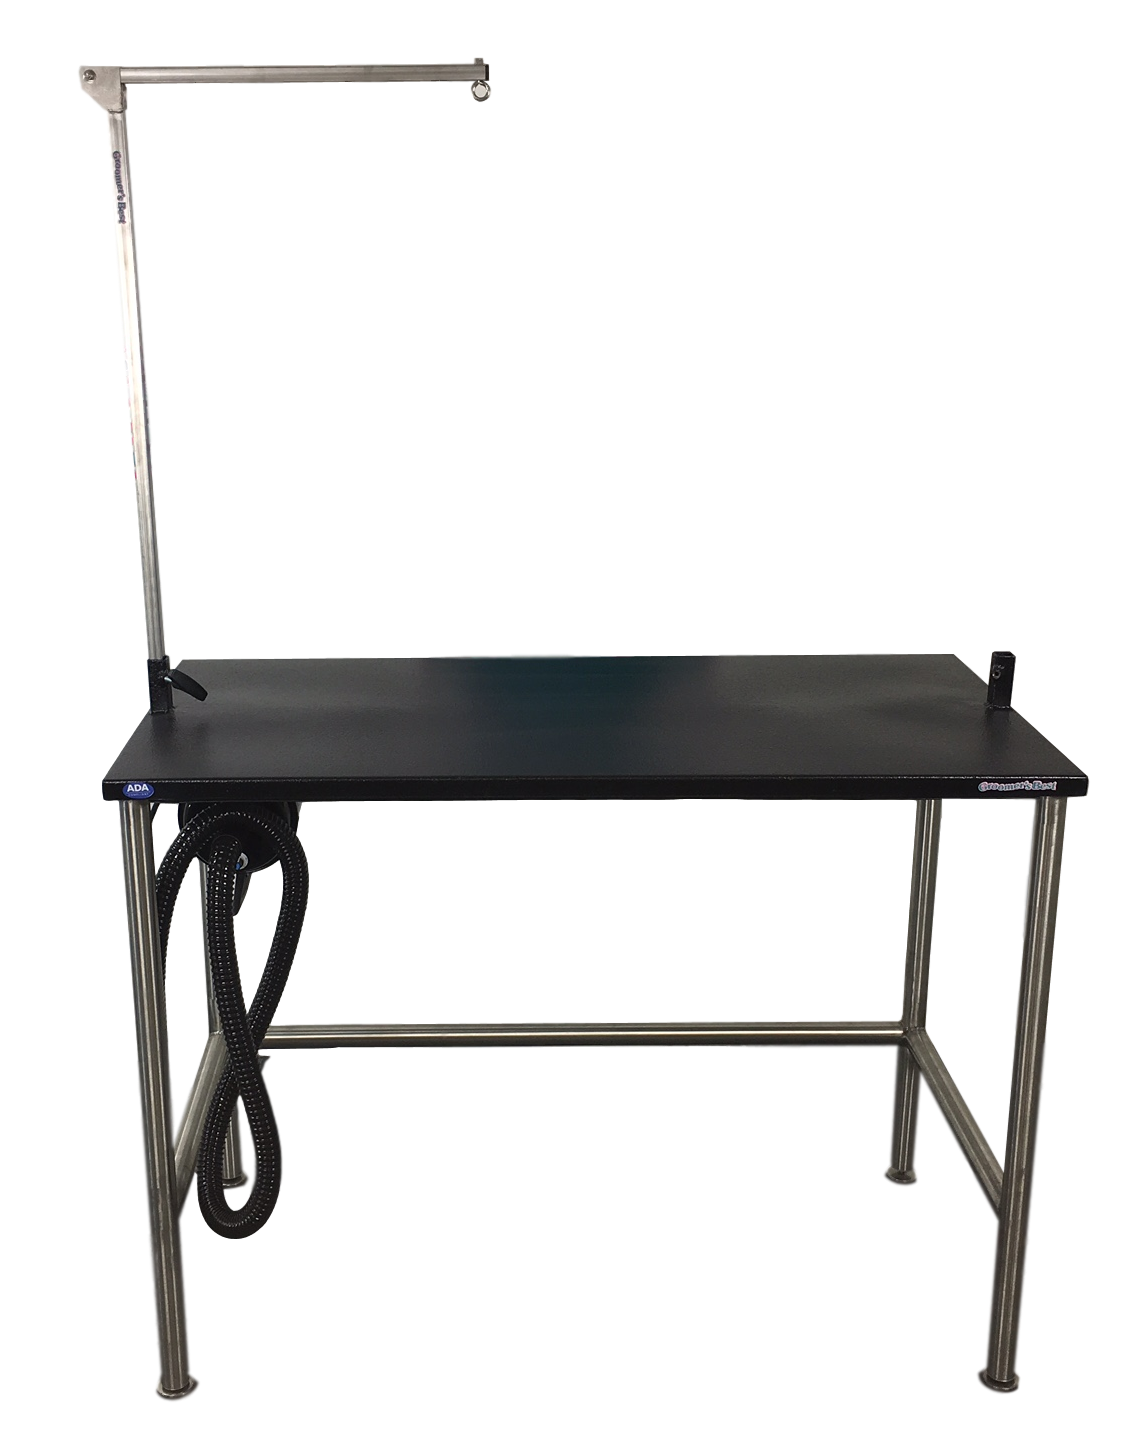 Groomer's Best Stationary Grooming Table w/ Grooming Arm (ADA Compliant)